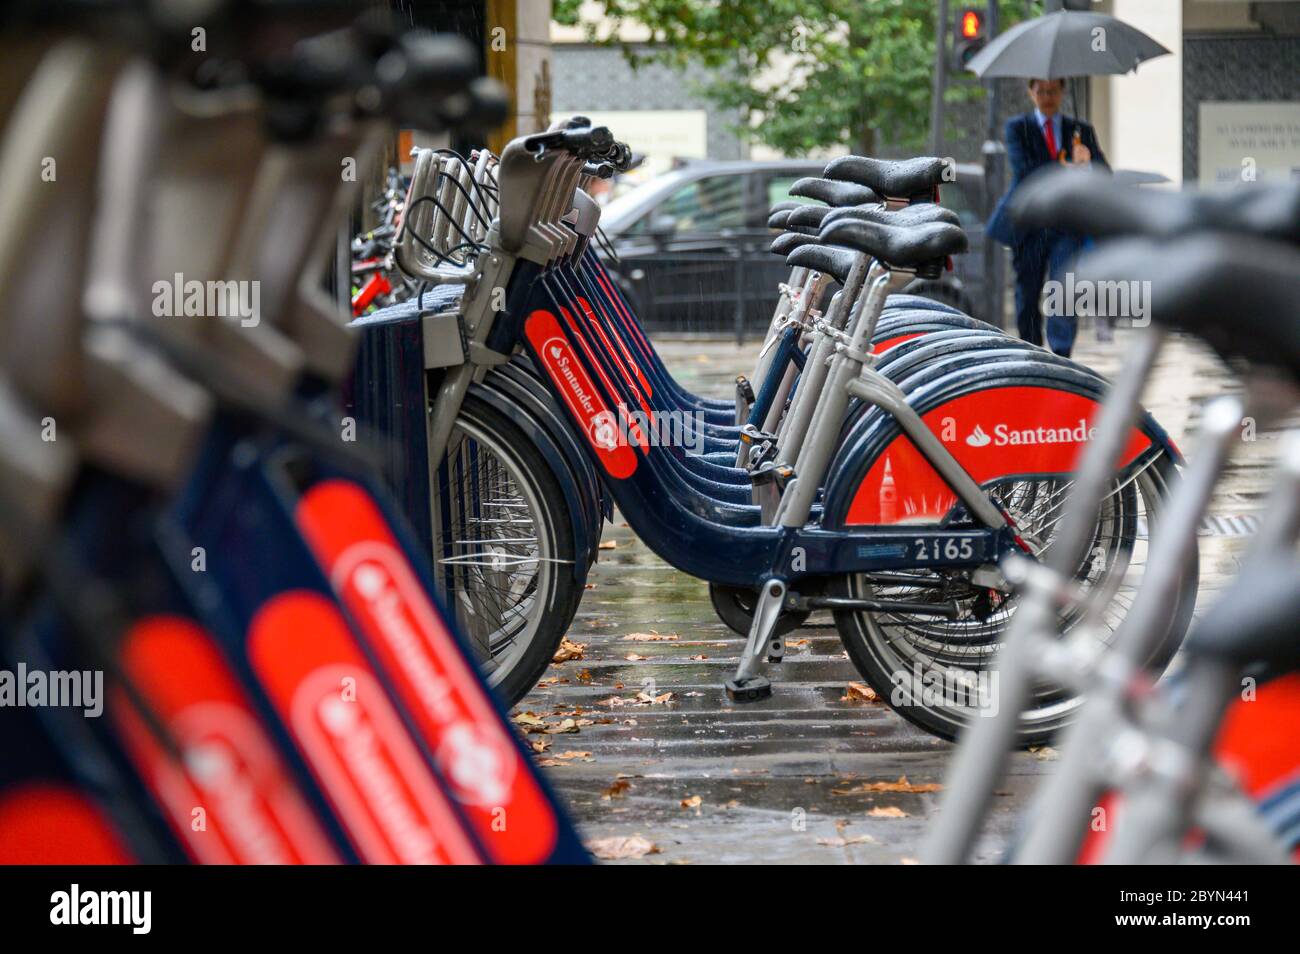 LONDON - SEPTEMBER 23, 2019: A line of 'Boris Bikes' for hire with a man walking past carrying an umbrella along The Strand on a rainy day Stock Photo